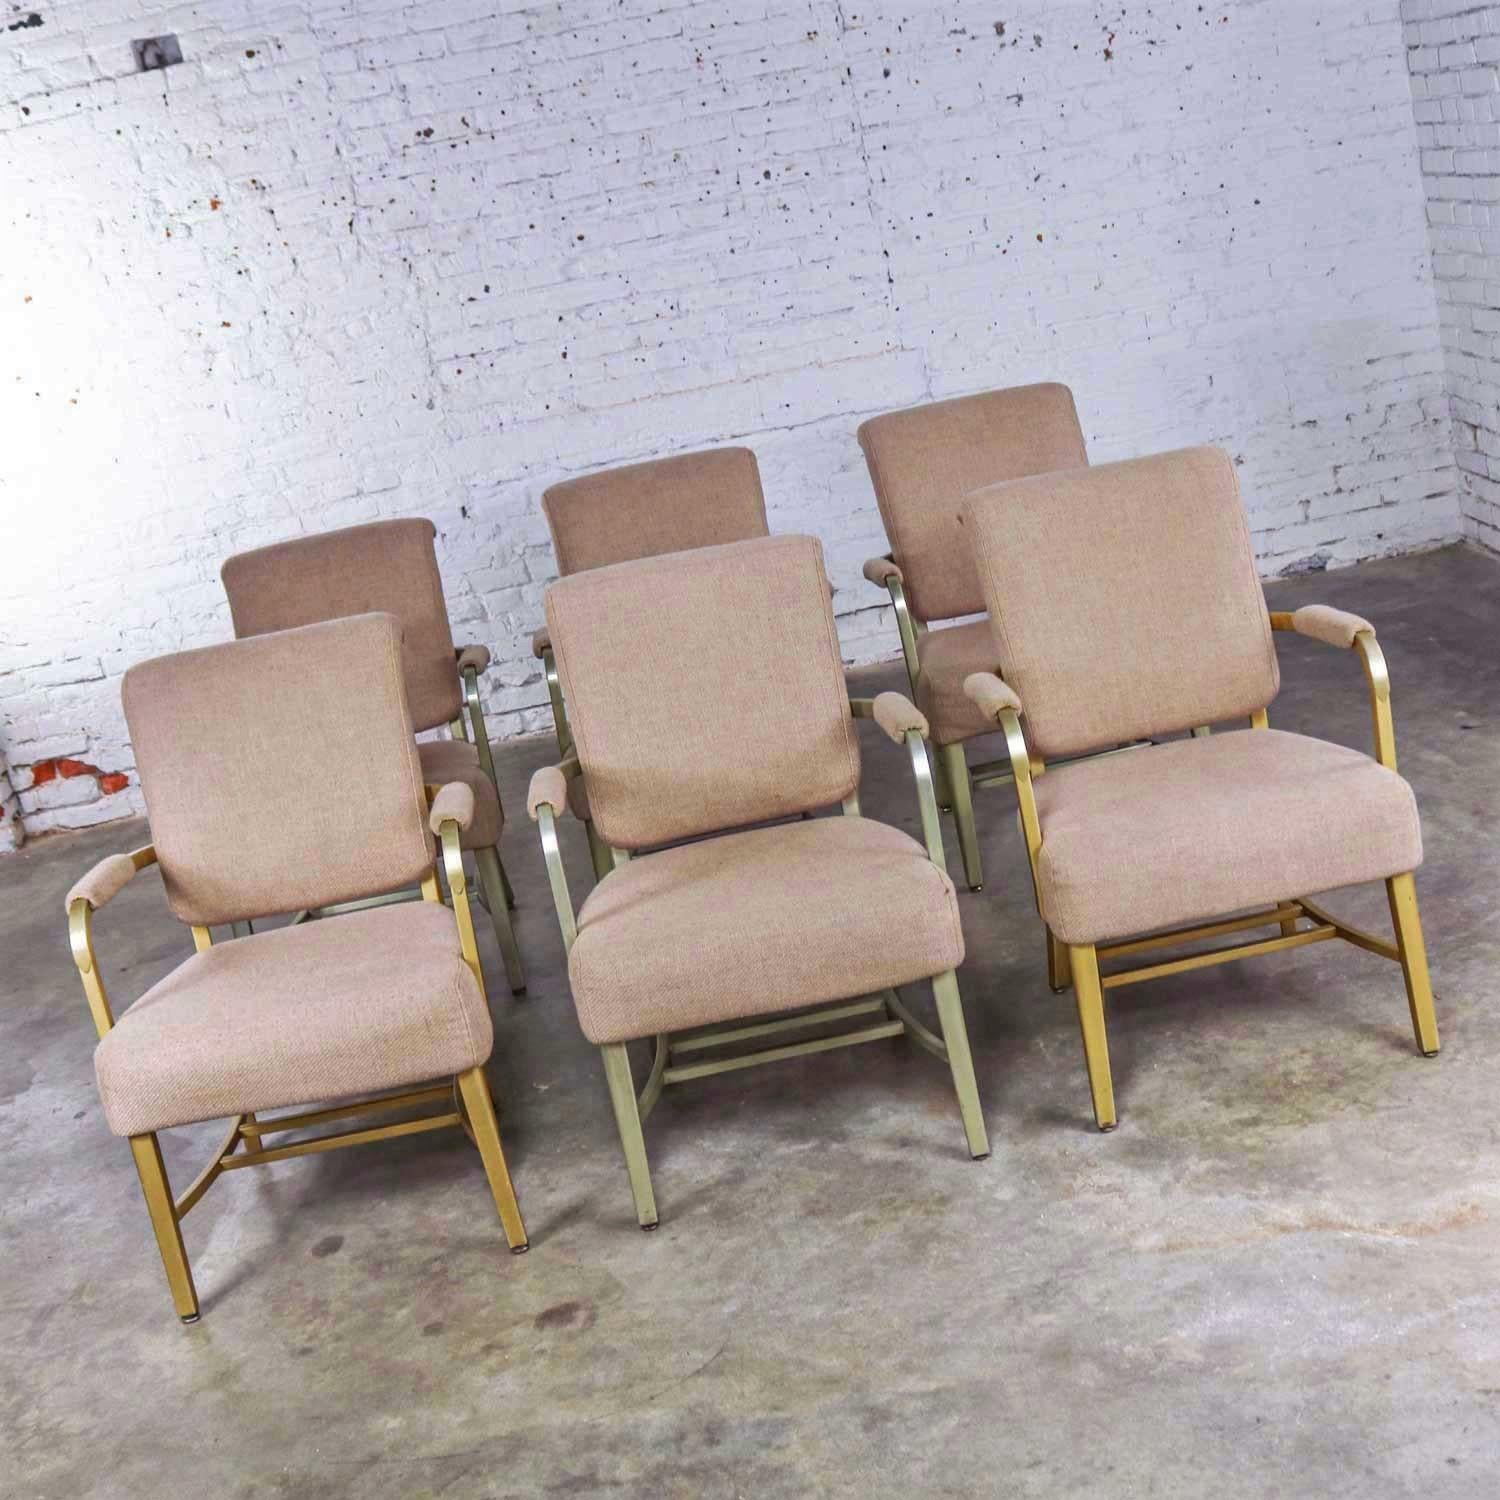 6 General Fireproofing Mid Century Machine Age Aluminum Goodform Armchairs In Good Condition For Sale In Topeka, KS